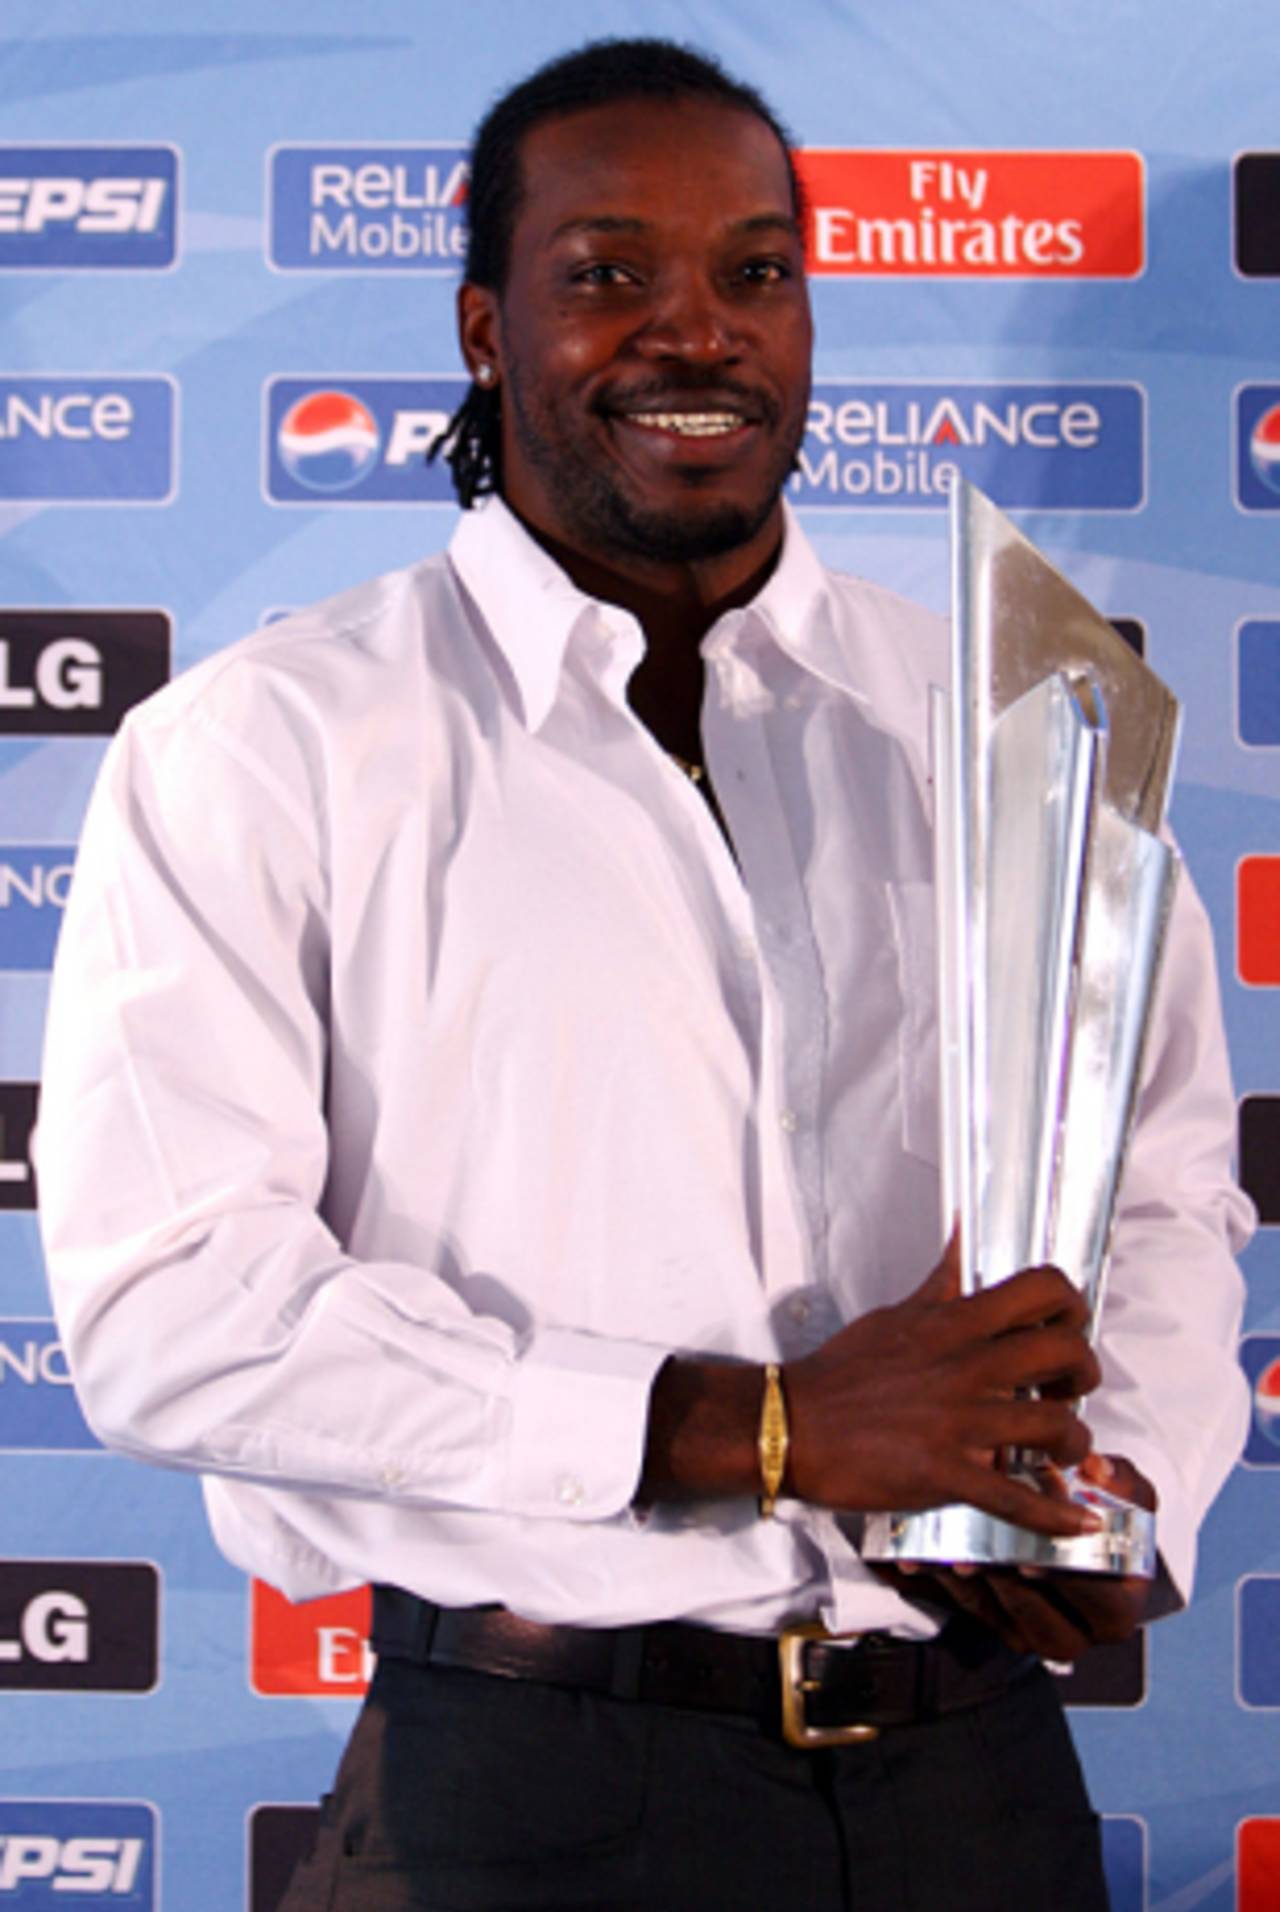 Chris Gayle with the World Twenty20 trophy, Lord's, May 31, 2009